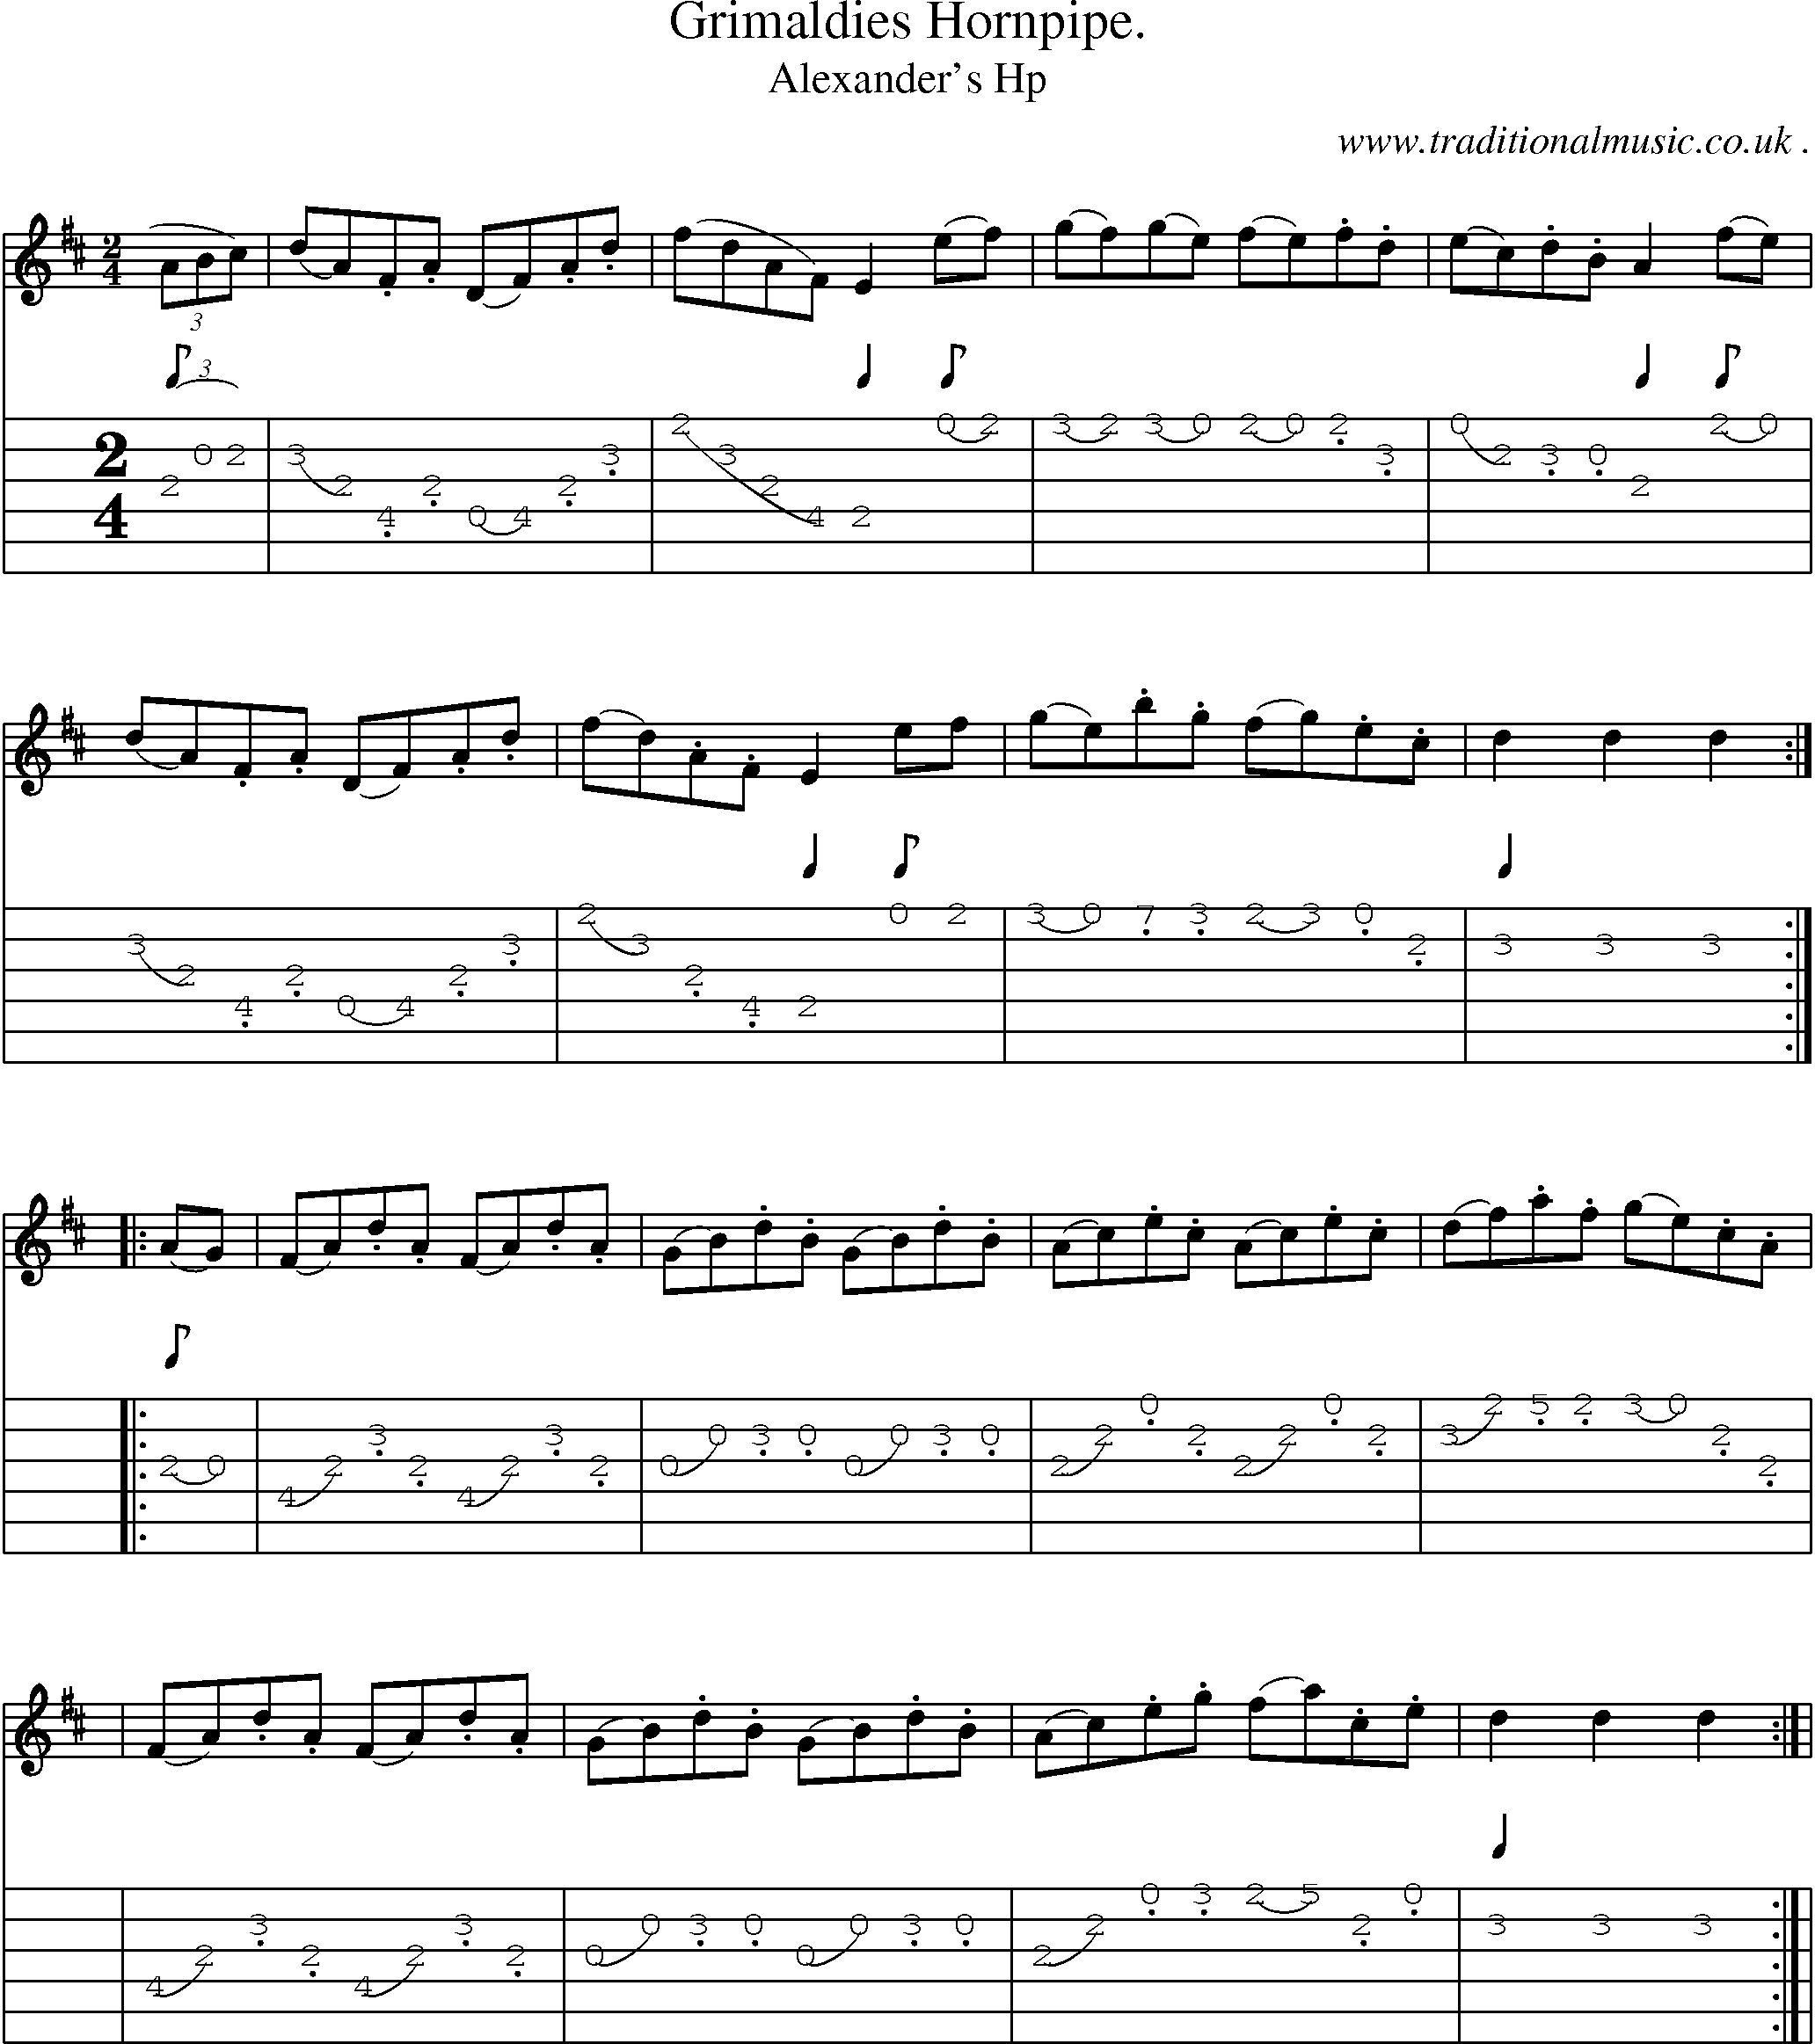 Sheet-Music and Guitar Tabs for Grimaldies Hornpipe